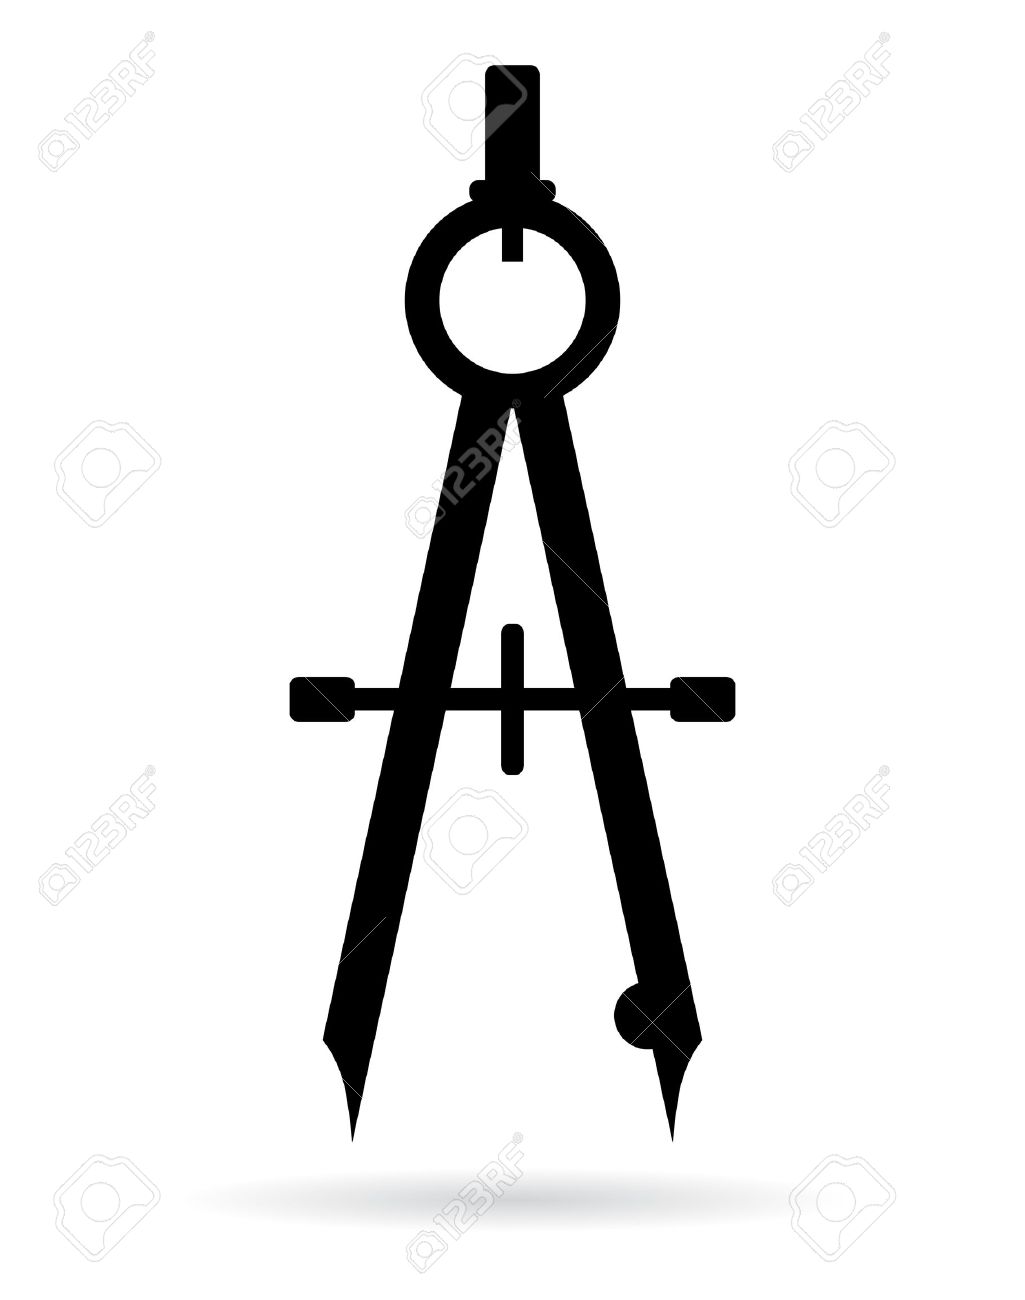 Drawing compass icon Royalty Free Vector Image